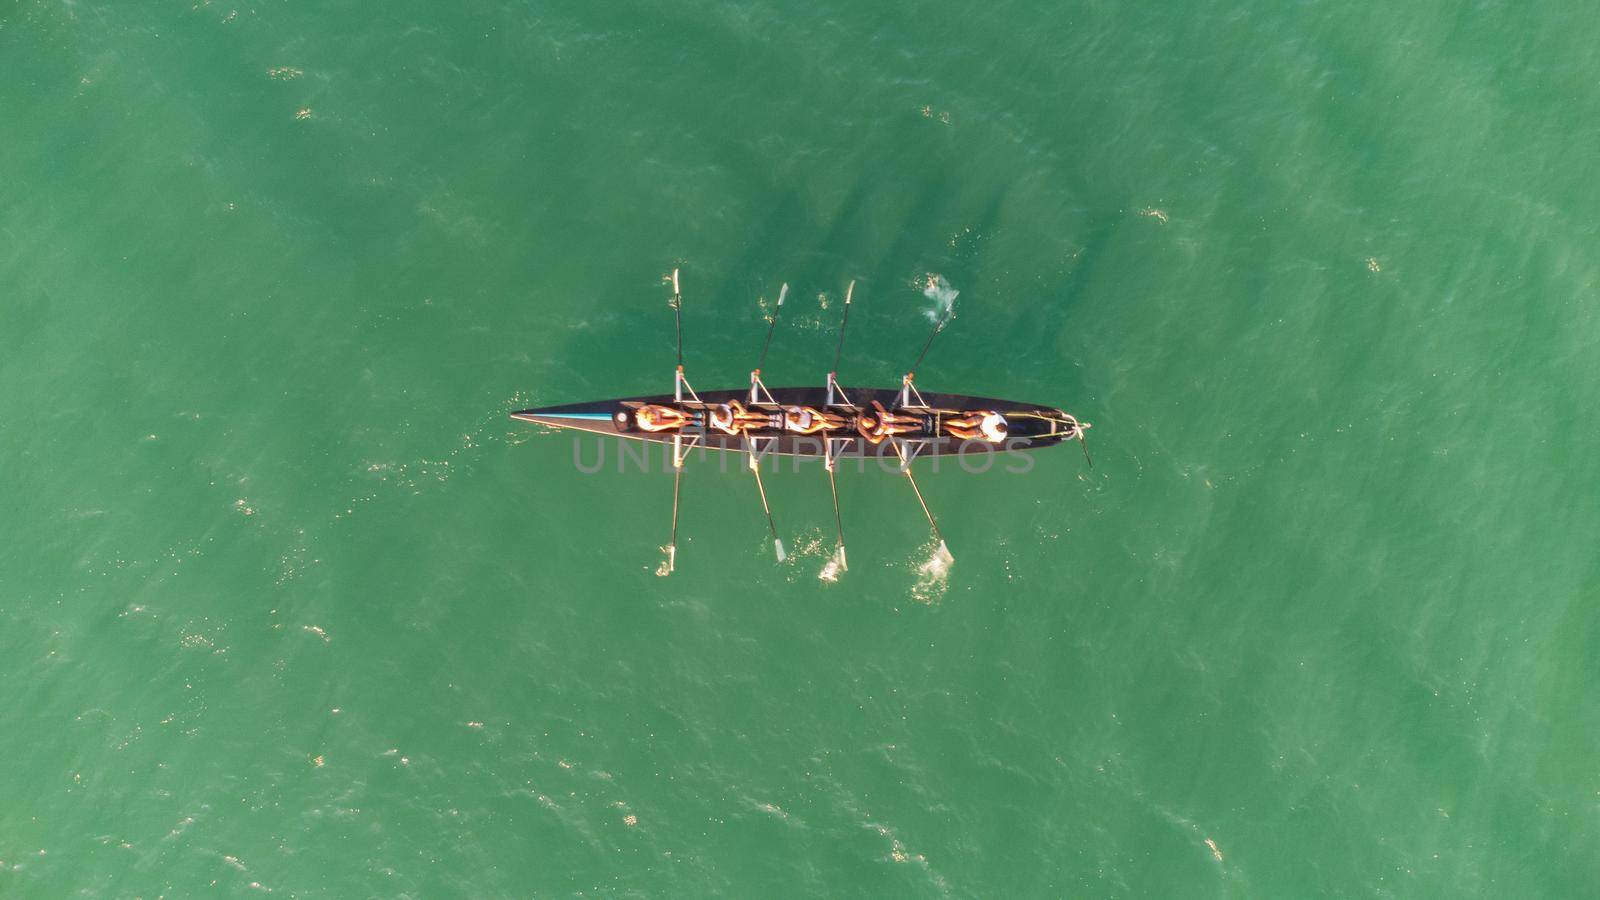 rowing team paddles on the tranquil sea by senkaya